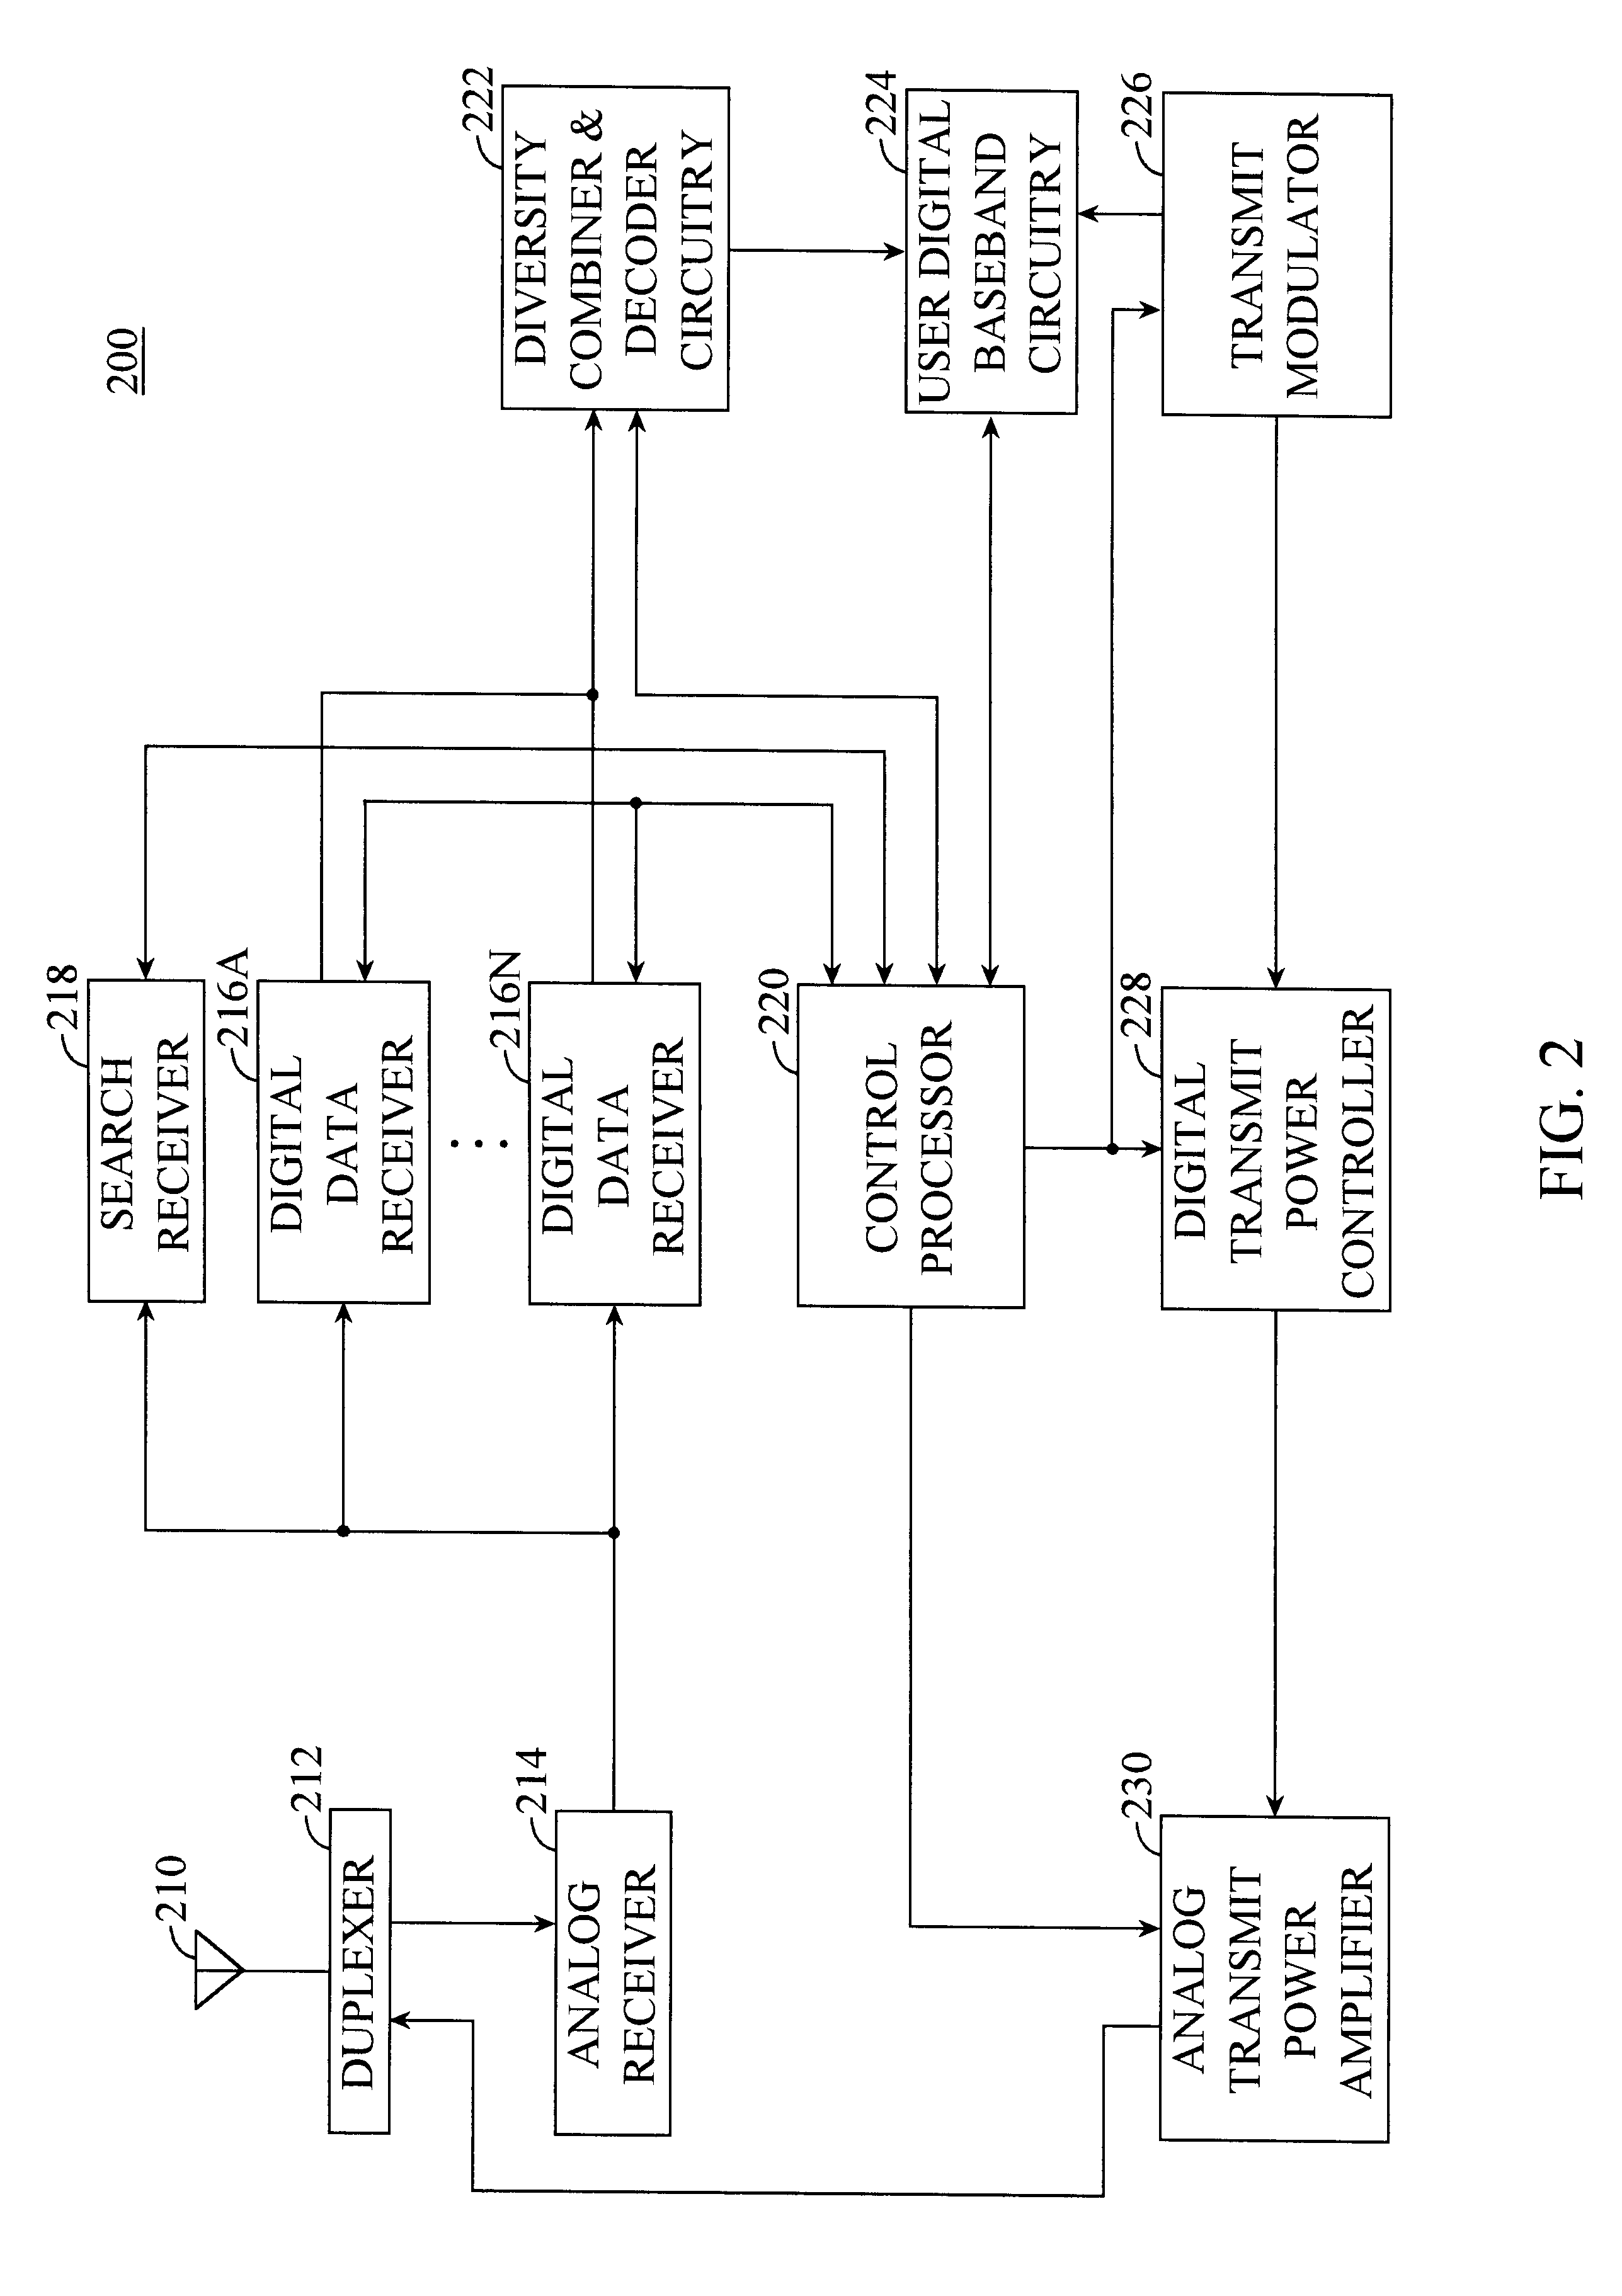 Method and apparatus for reducing frame error rate through signal power adjustment